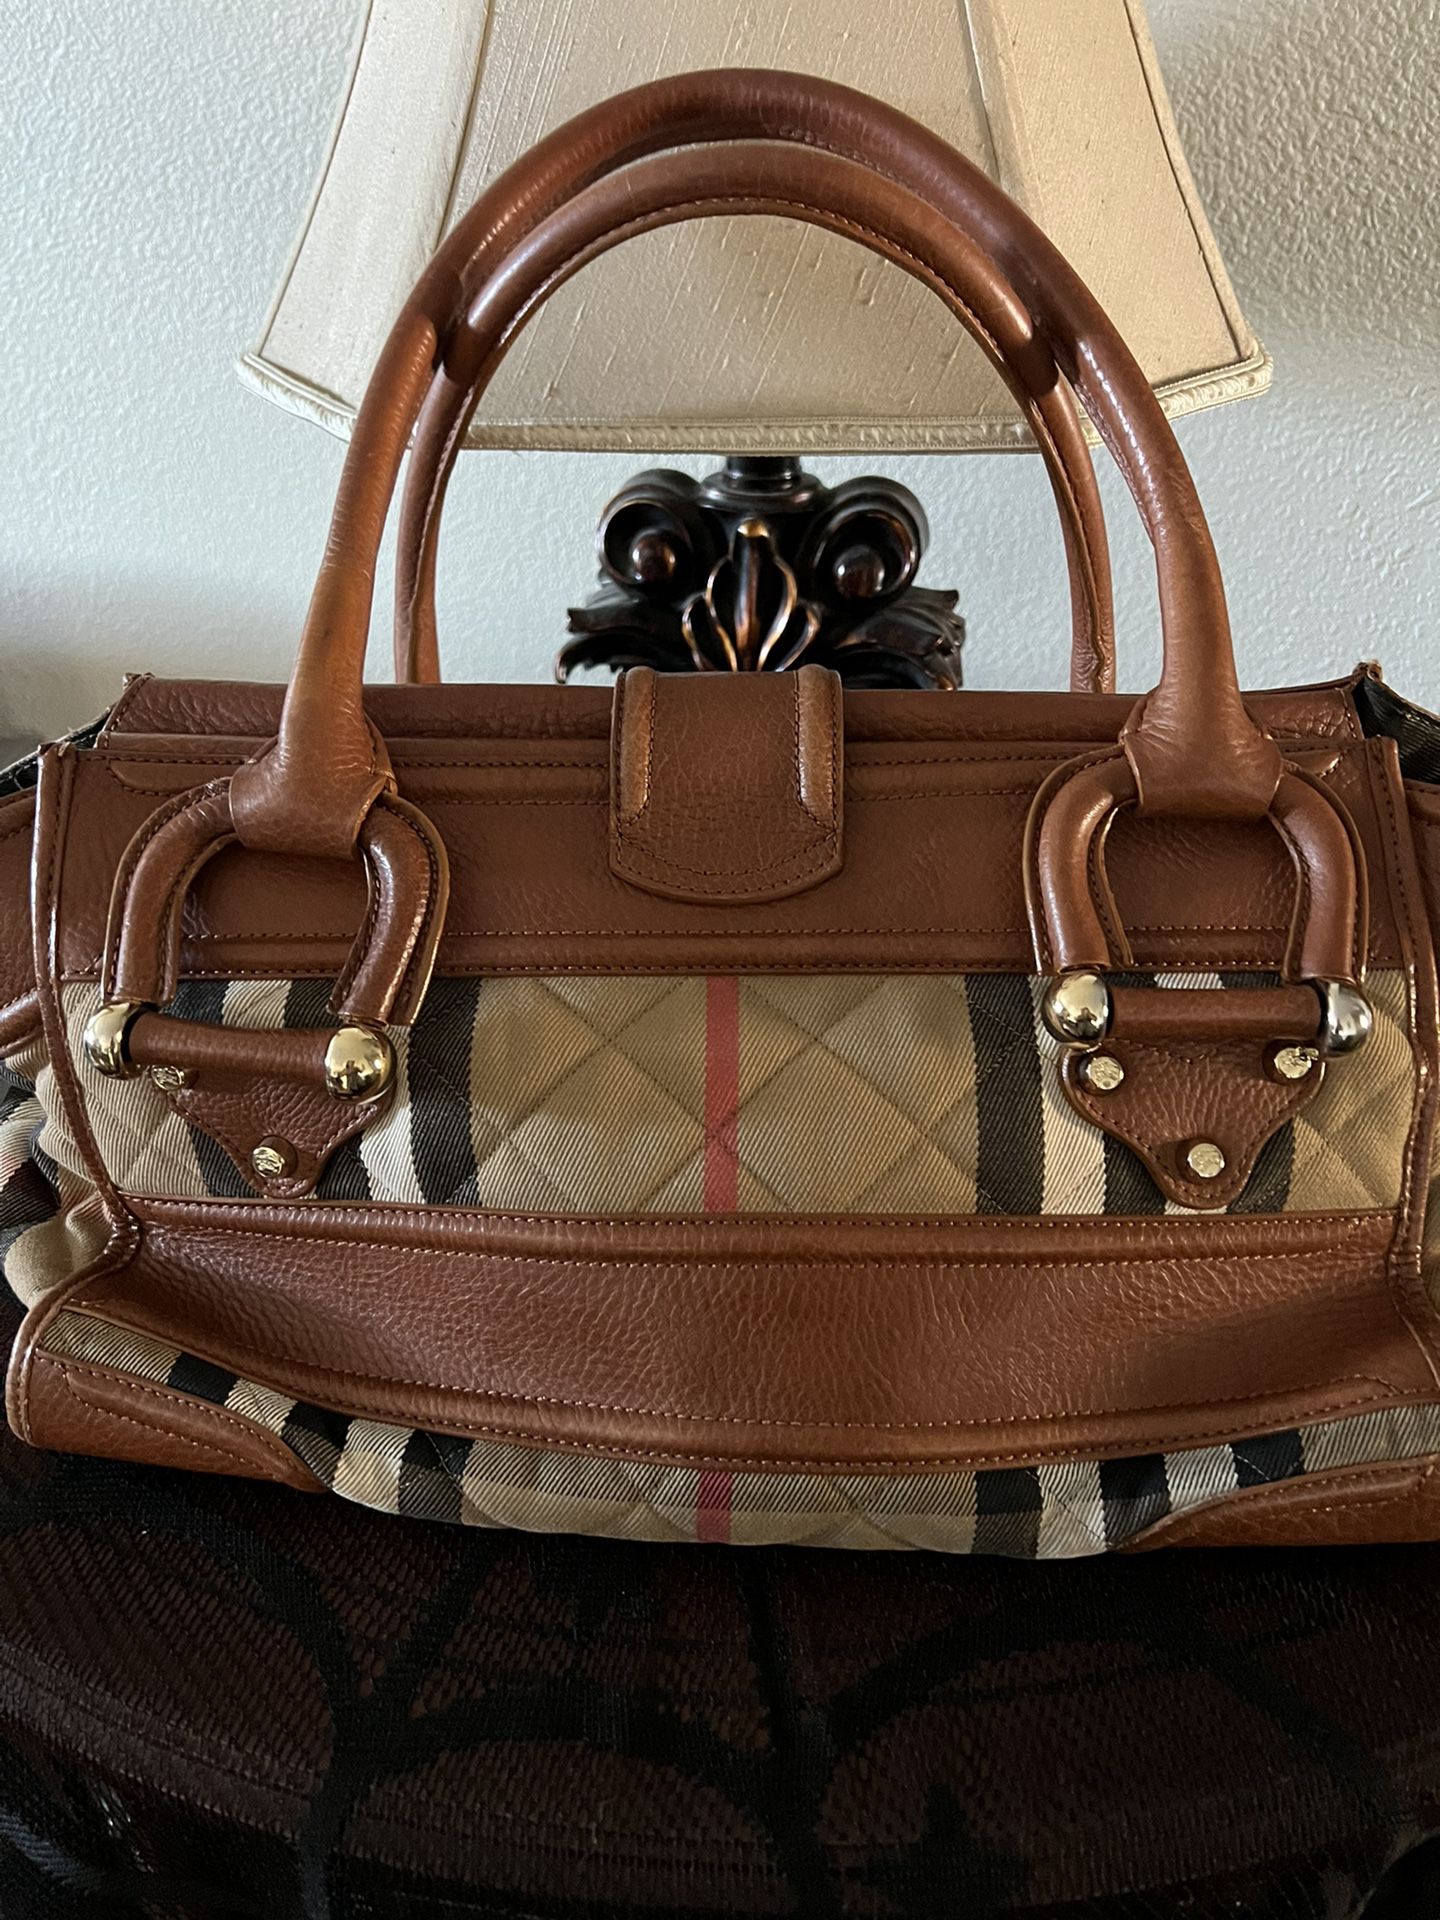 Beautiful Burberry Large Purse And Wallet Original 